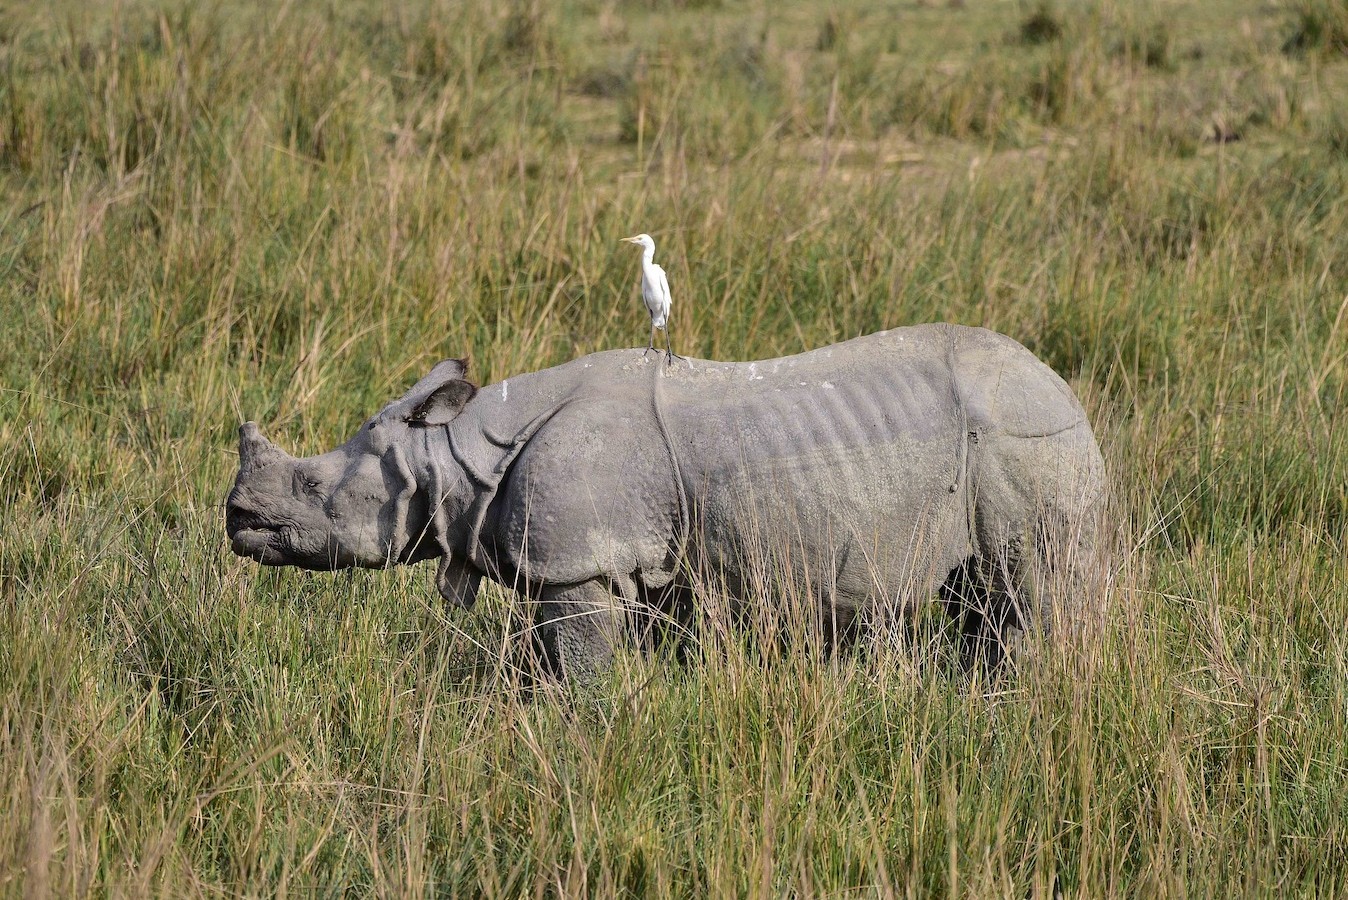 An Indian rhinoceros grazes with an egret on its back in the Pobitora Wildlife Sanctuary in Assam, India, December 20, 2023. /CFP